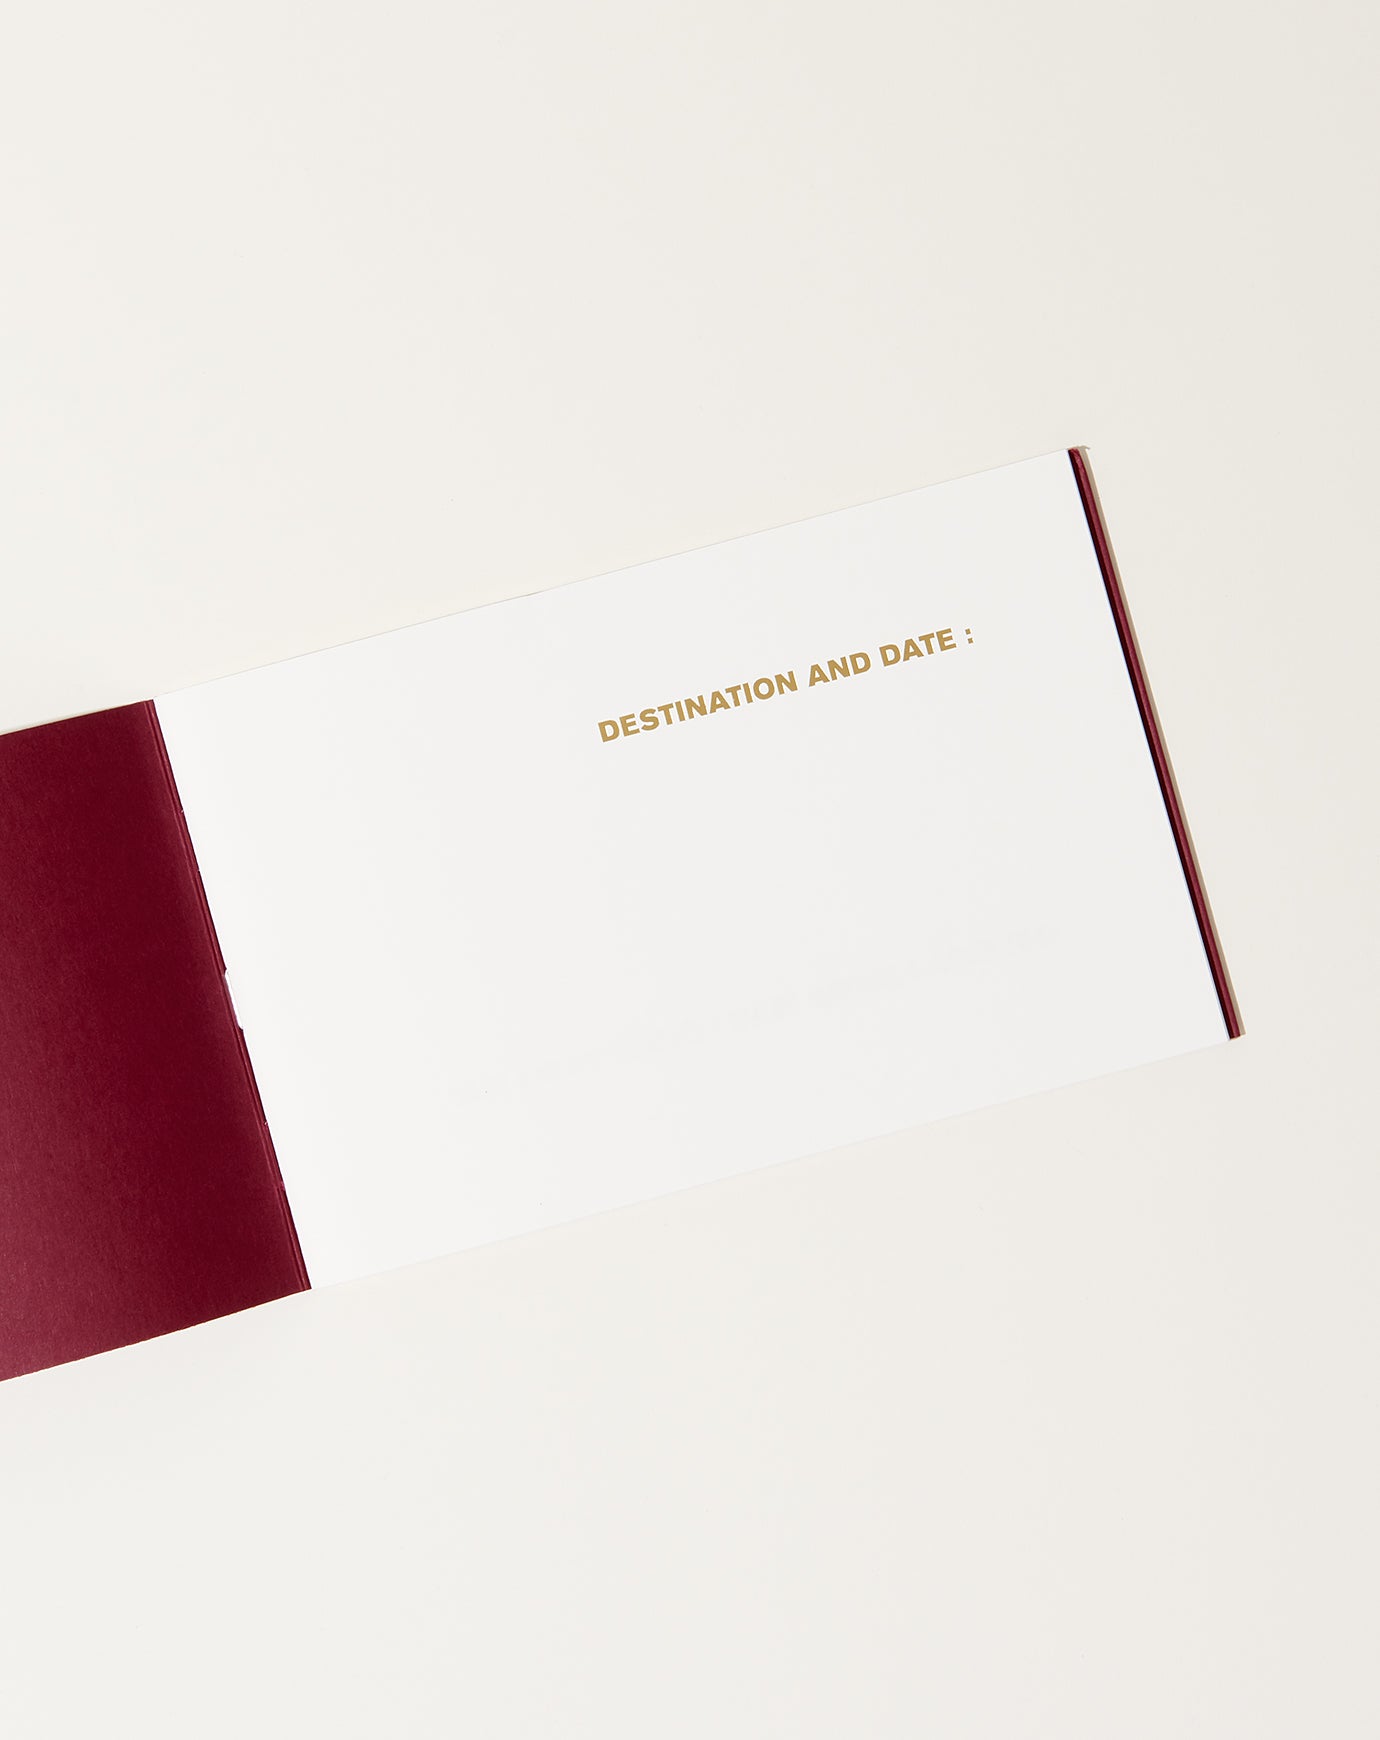 Supereditions Travel Notebook in Burgundy